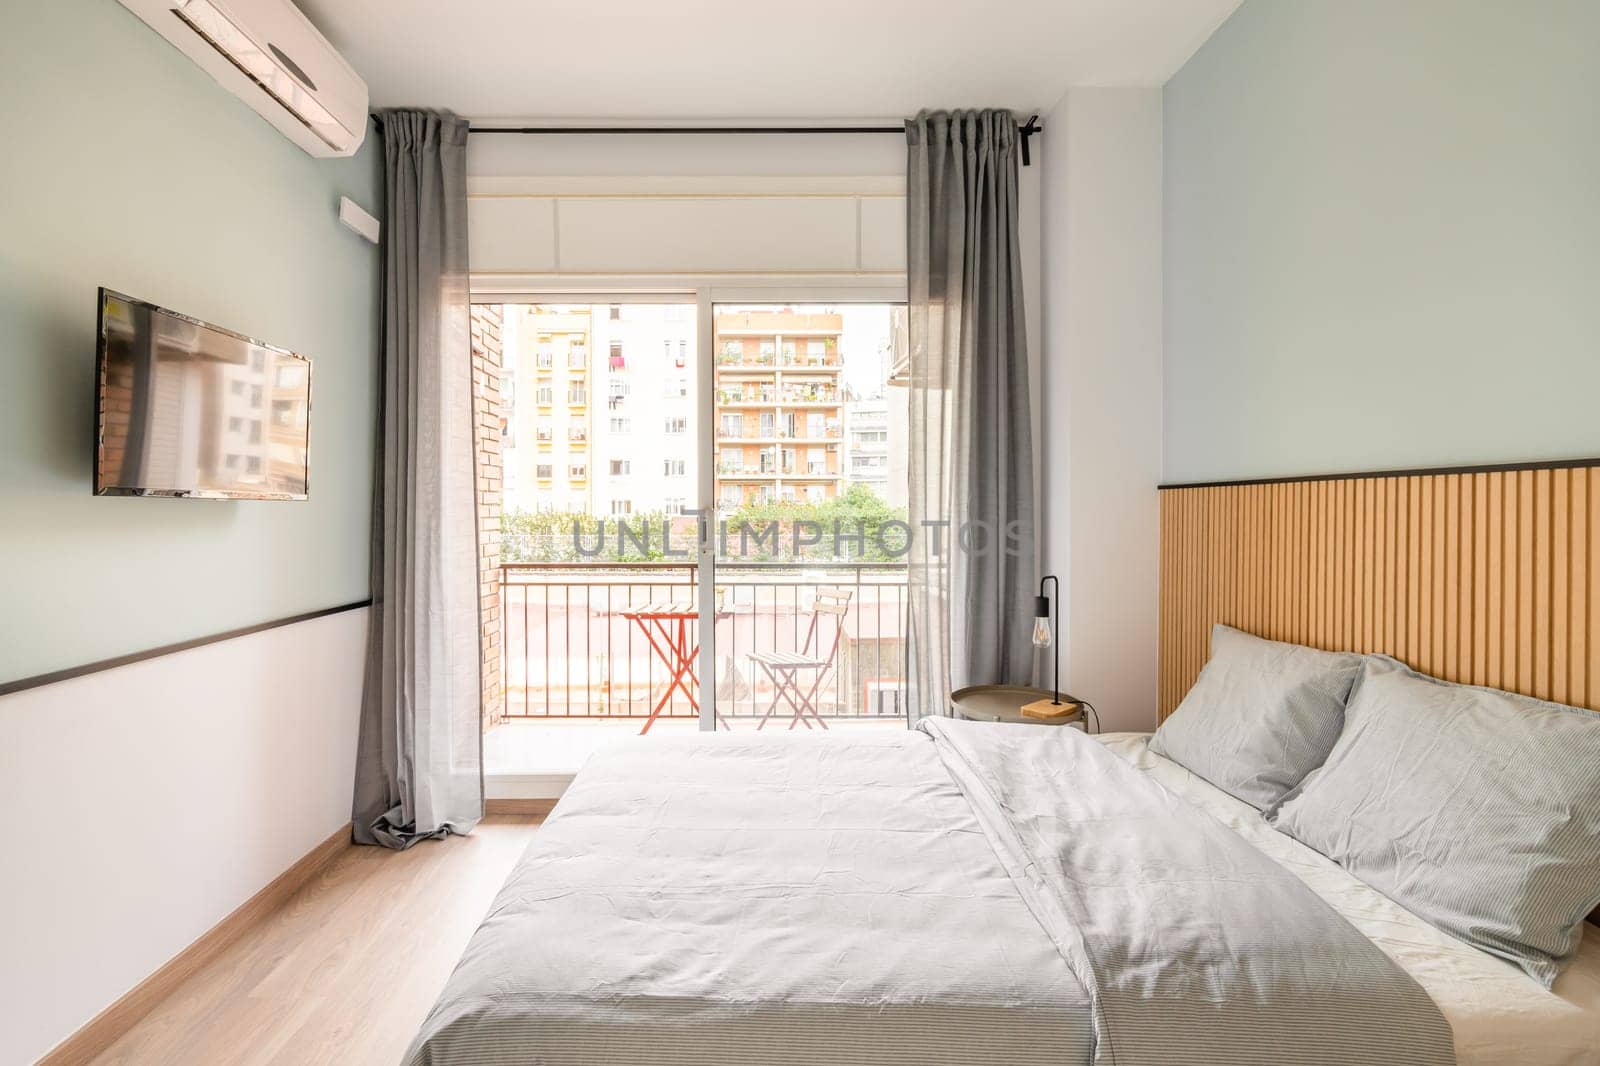 Spacious bright room with bed, large opening on entire wall with sliding plastic doors and access to balcony. Room has table with chair, air conditioning and TV for pleasant leisure